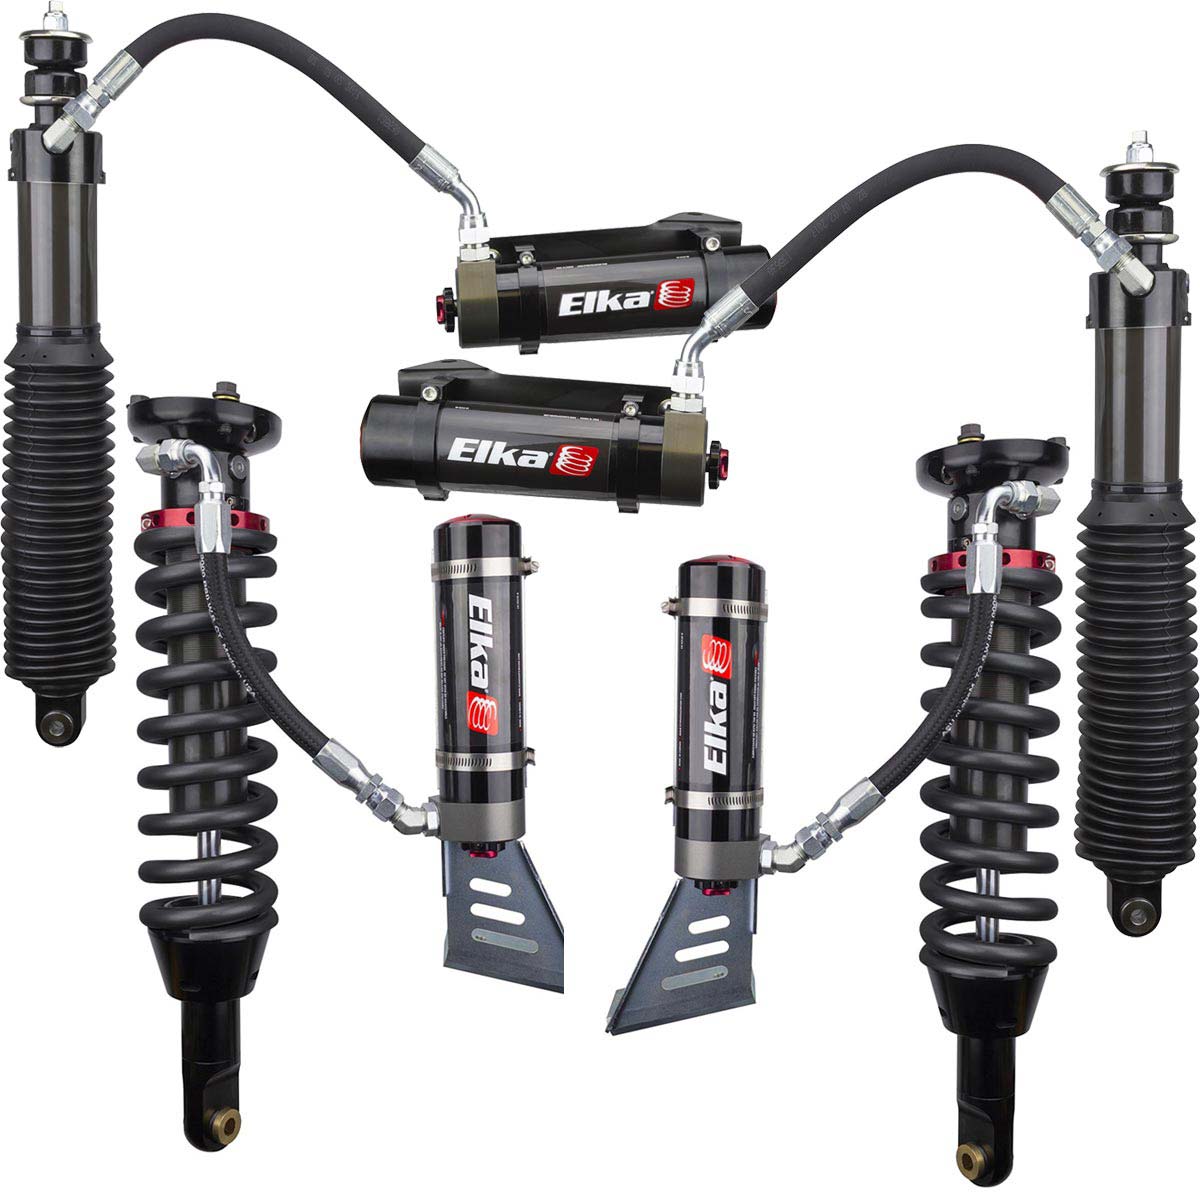 Elka 2.5 DC RESERVOIR FRONT & REAR SHOCKS KIT for TOYOTA 4RUNNER, 2010 to 2020 (with KDSS) (2 in. to 3 in. lift) w/Compression Adjust